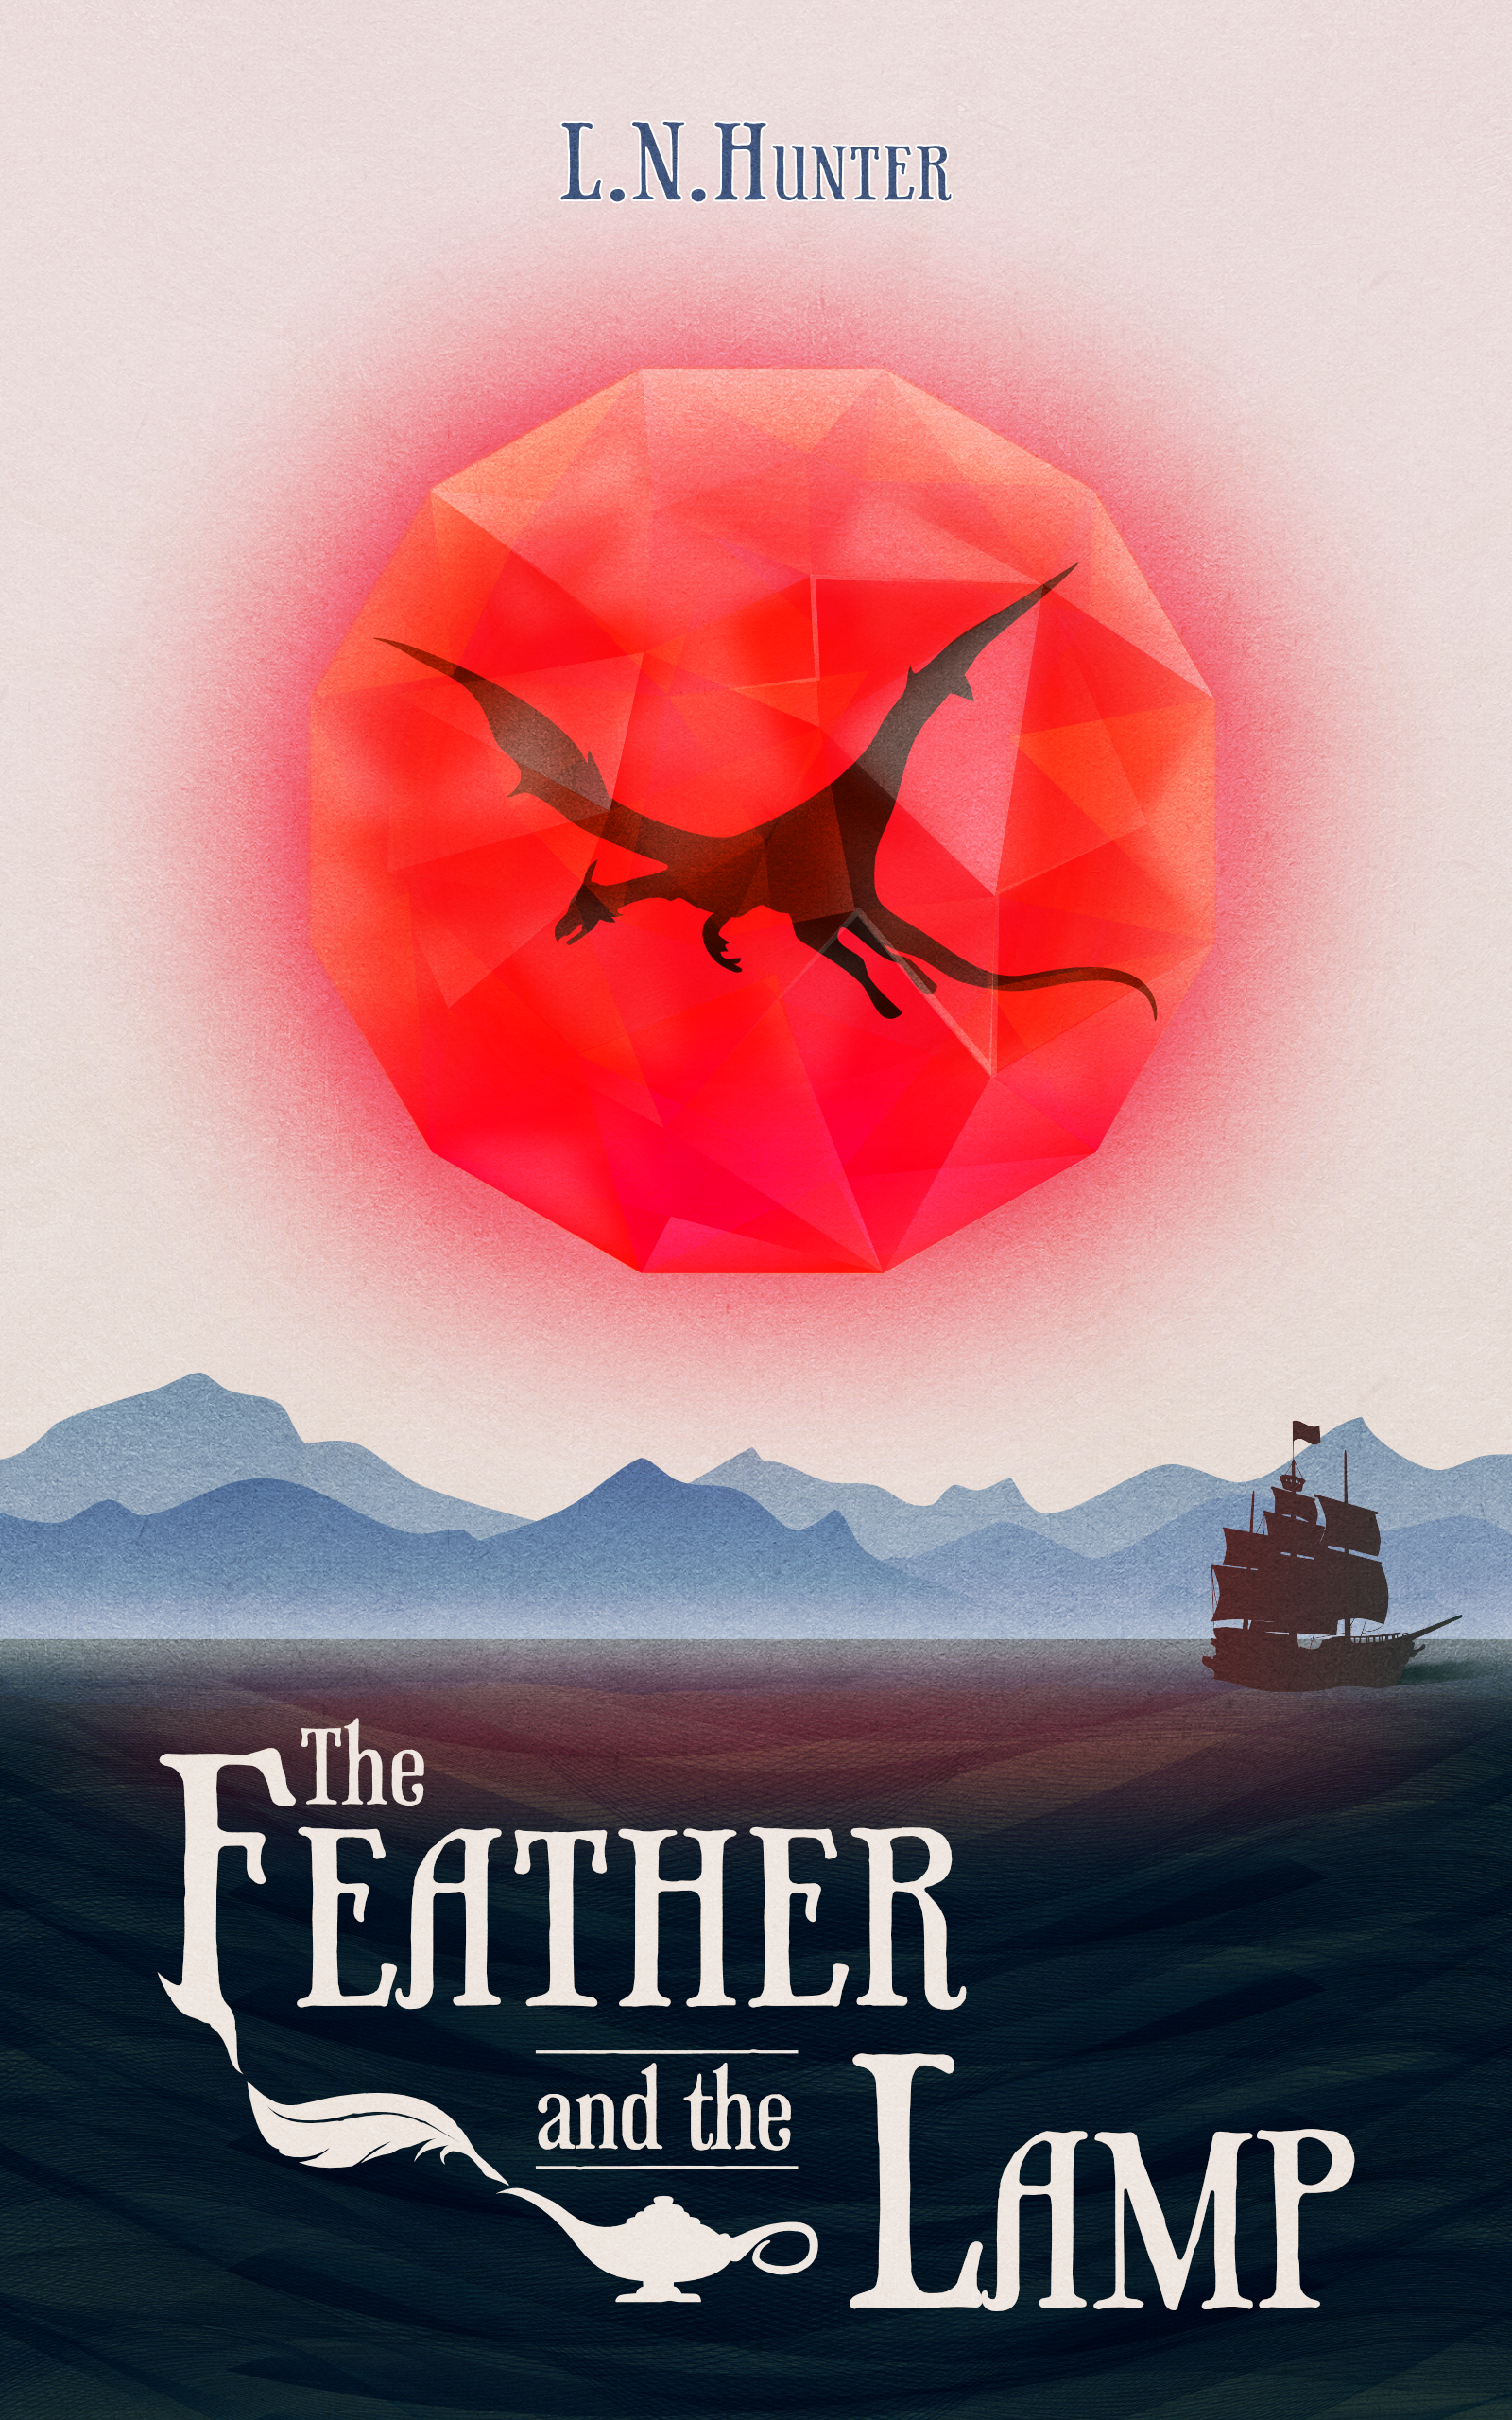 A book cover featuring a dragon floating inside a quantum ruby over a desolate landscape with a mountain range in the background, and a marooned ship in the foreground.